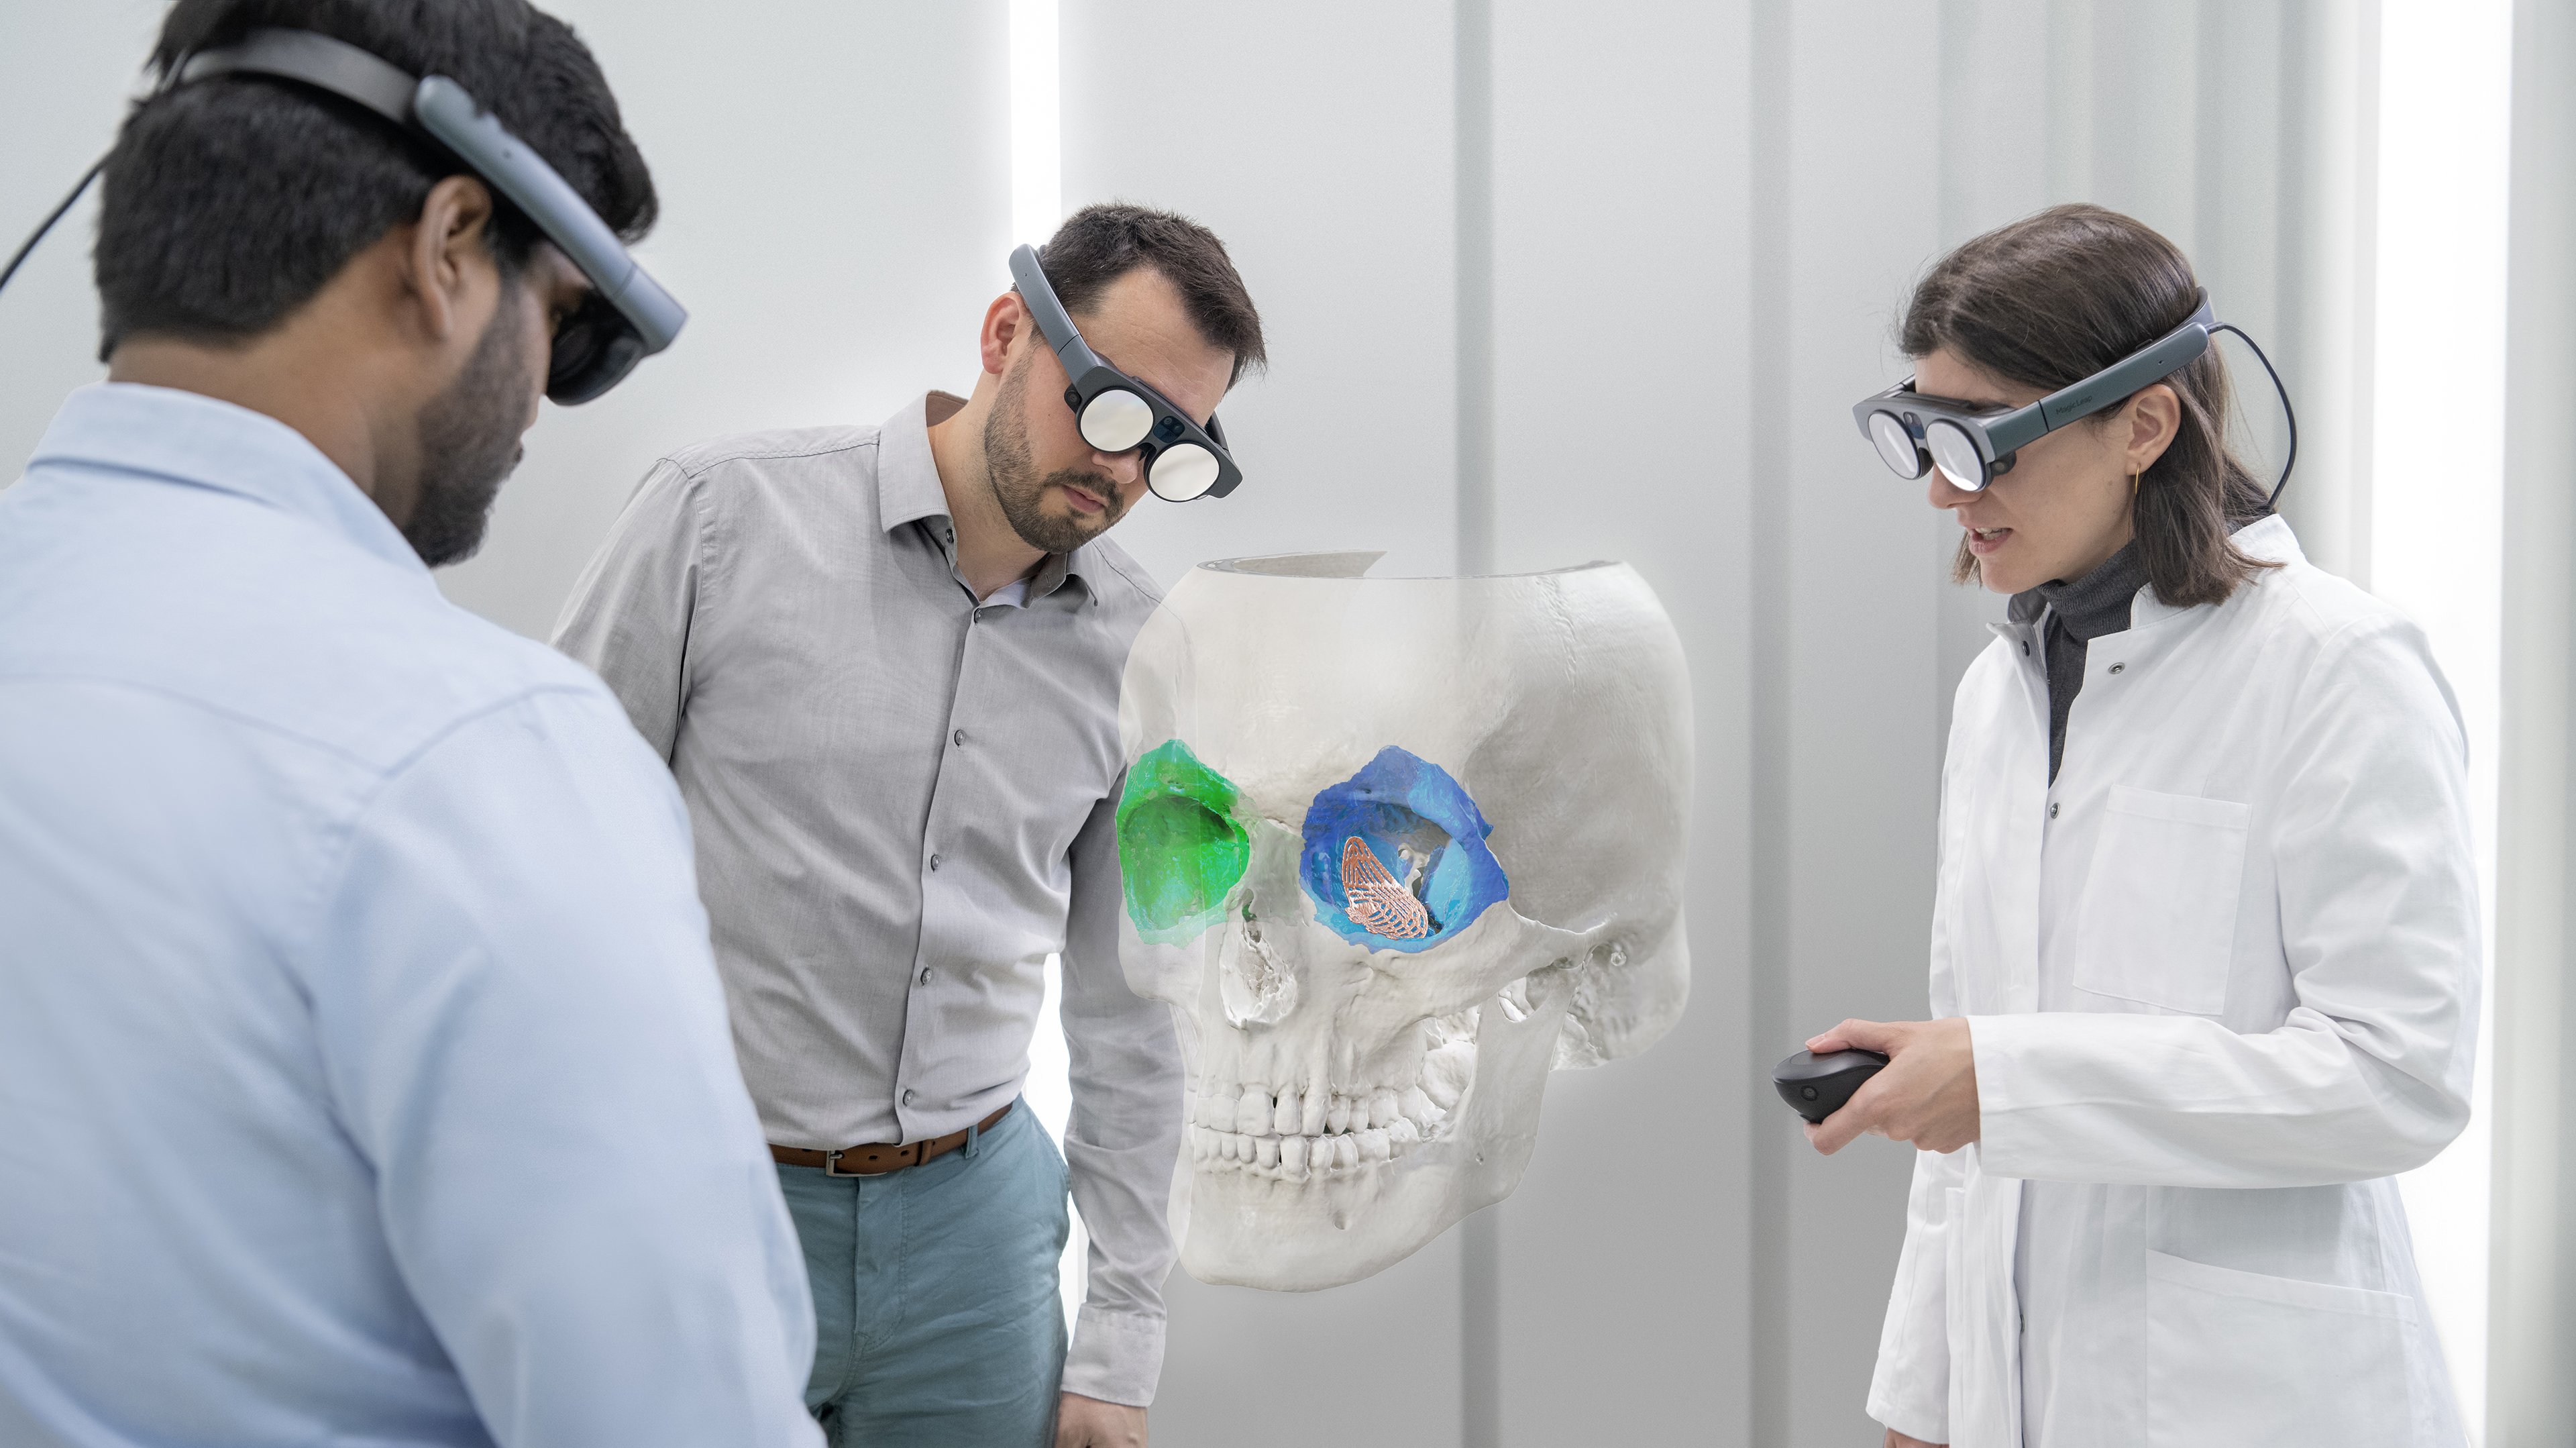 Brainlab's Mixed Reality Viewer in use, featuring three individuals in an office setting examining a cranial image